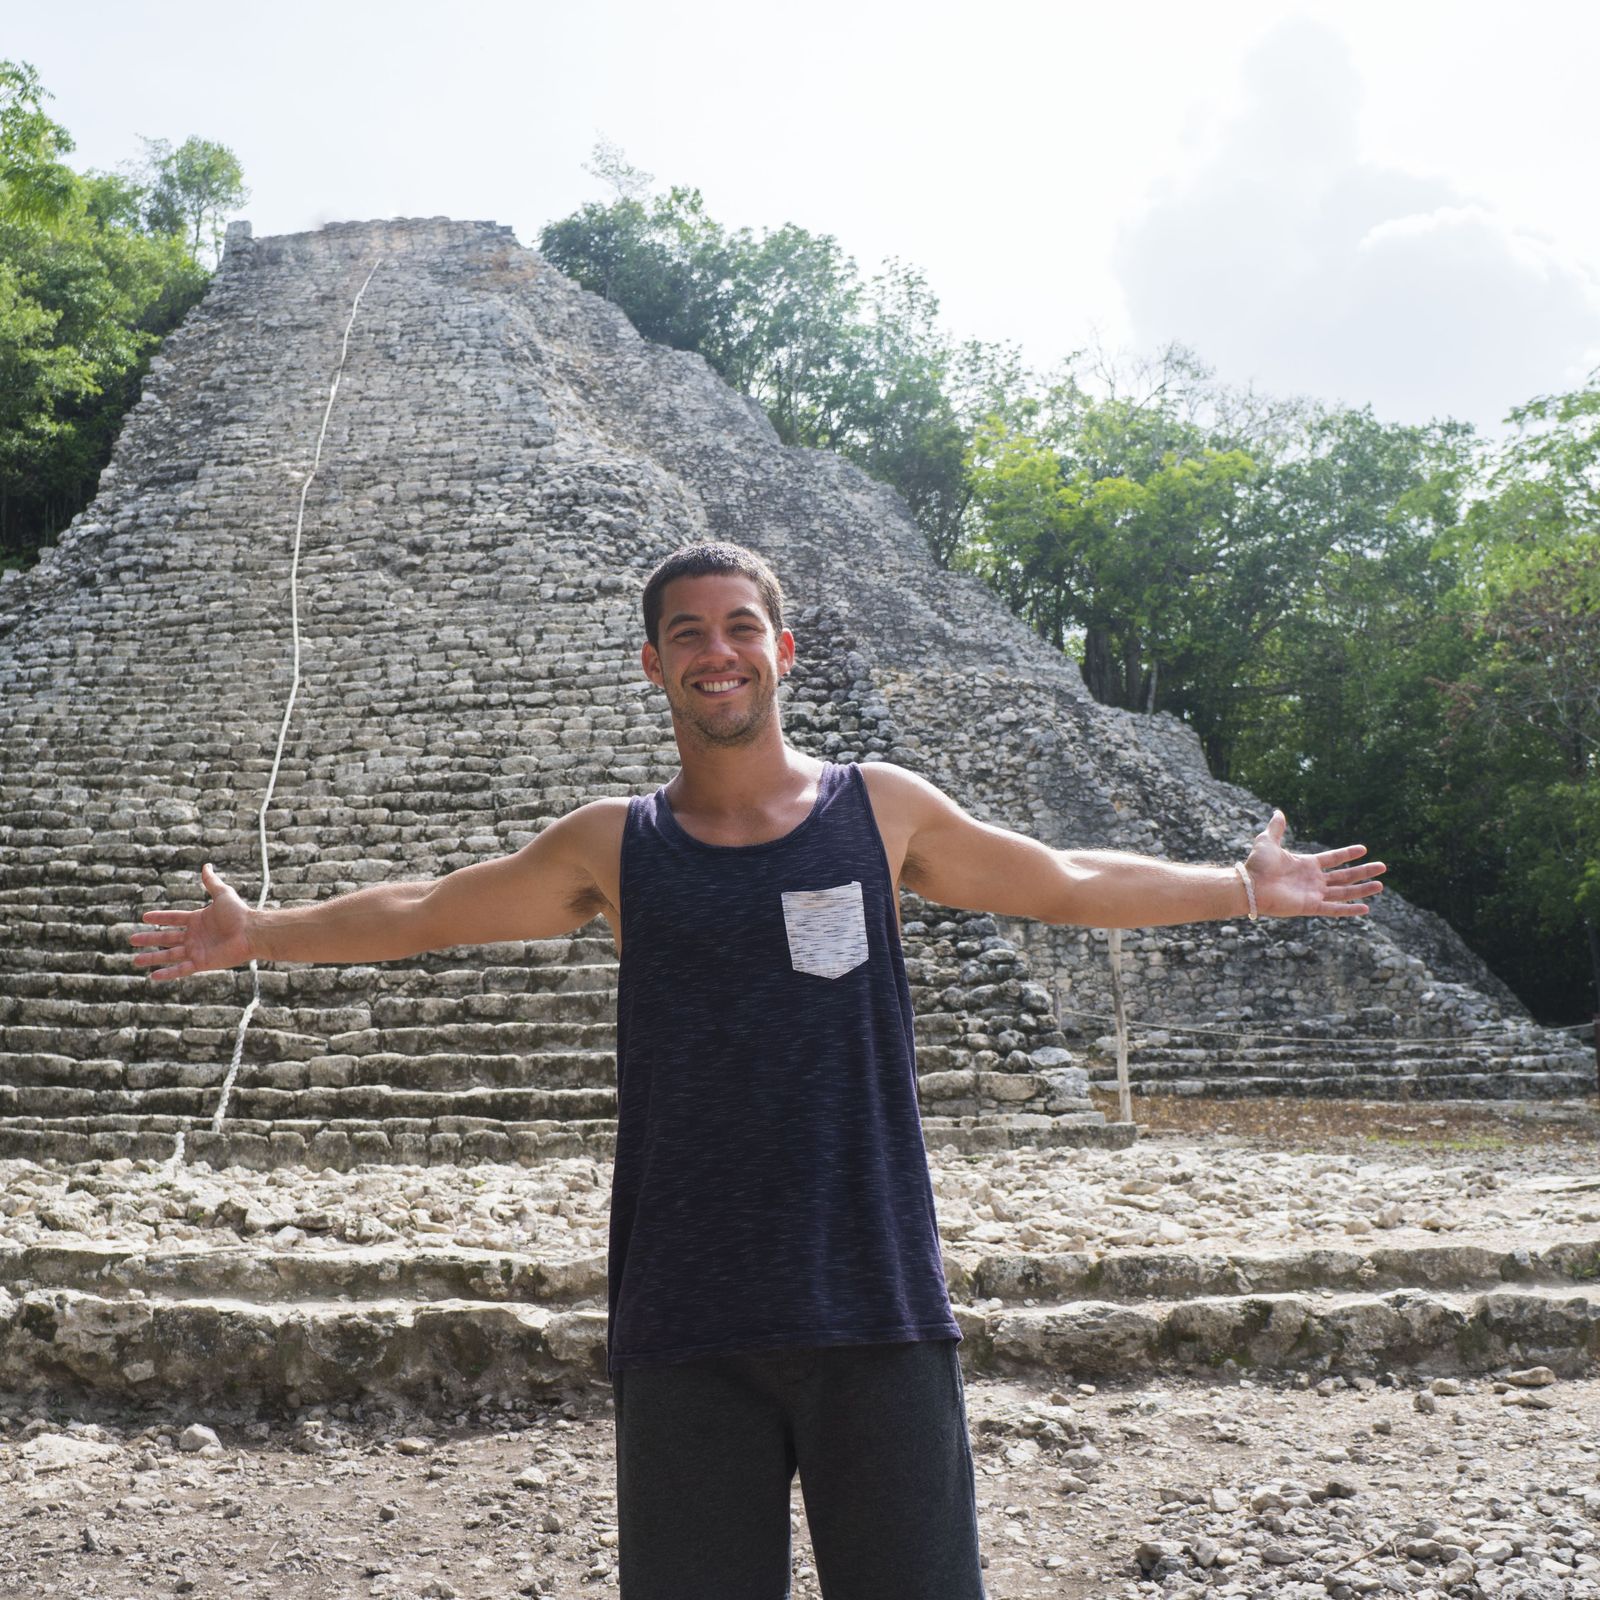 Visit the Nohoch Mul pyramid in Cobá and climb up to enjoy the views